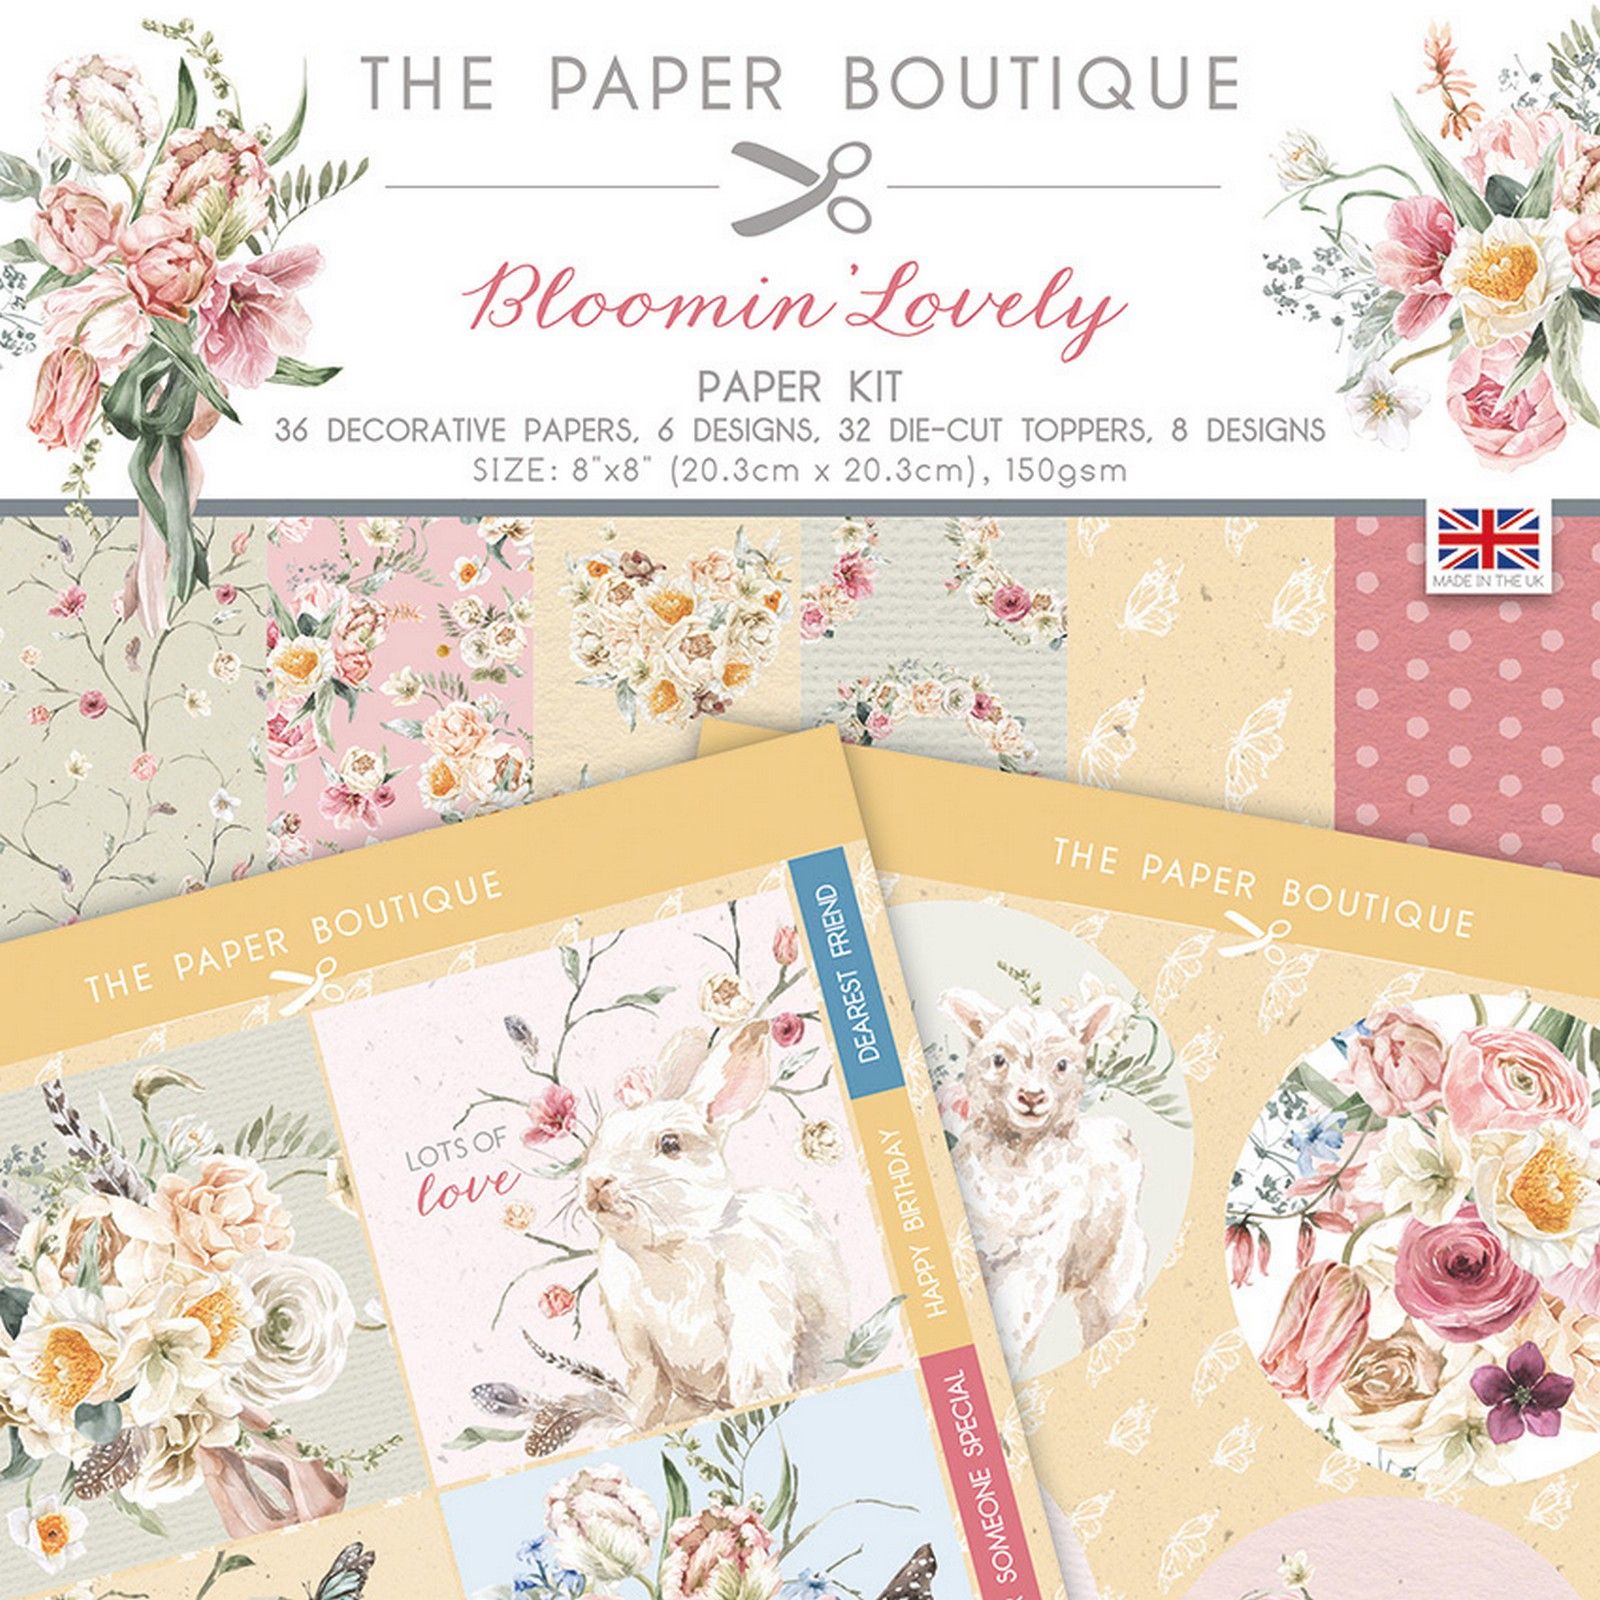 The Paper Boutique • Blooming lovely paper kit